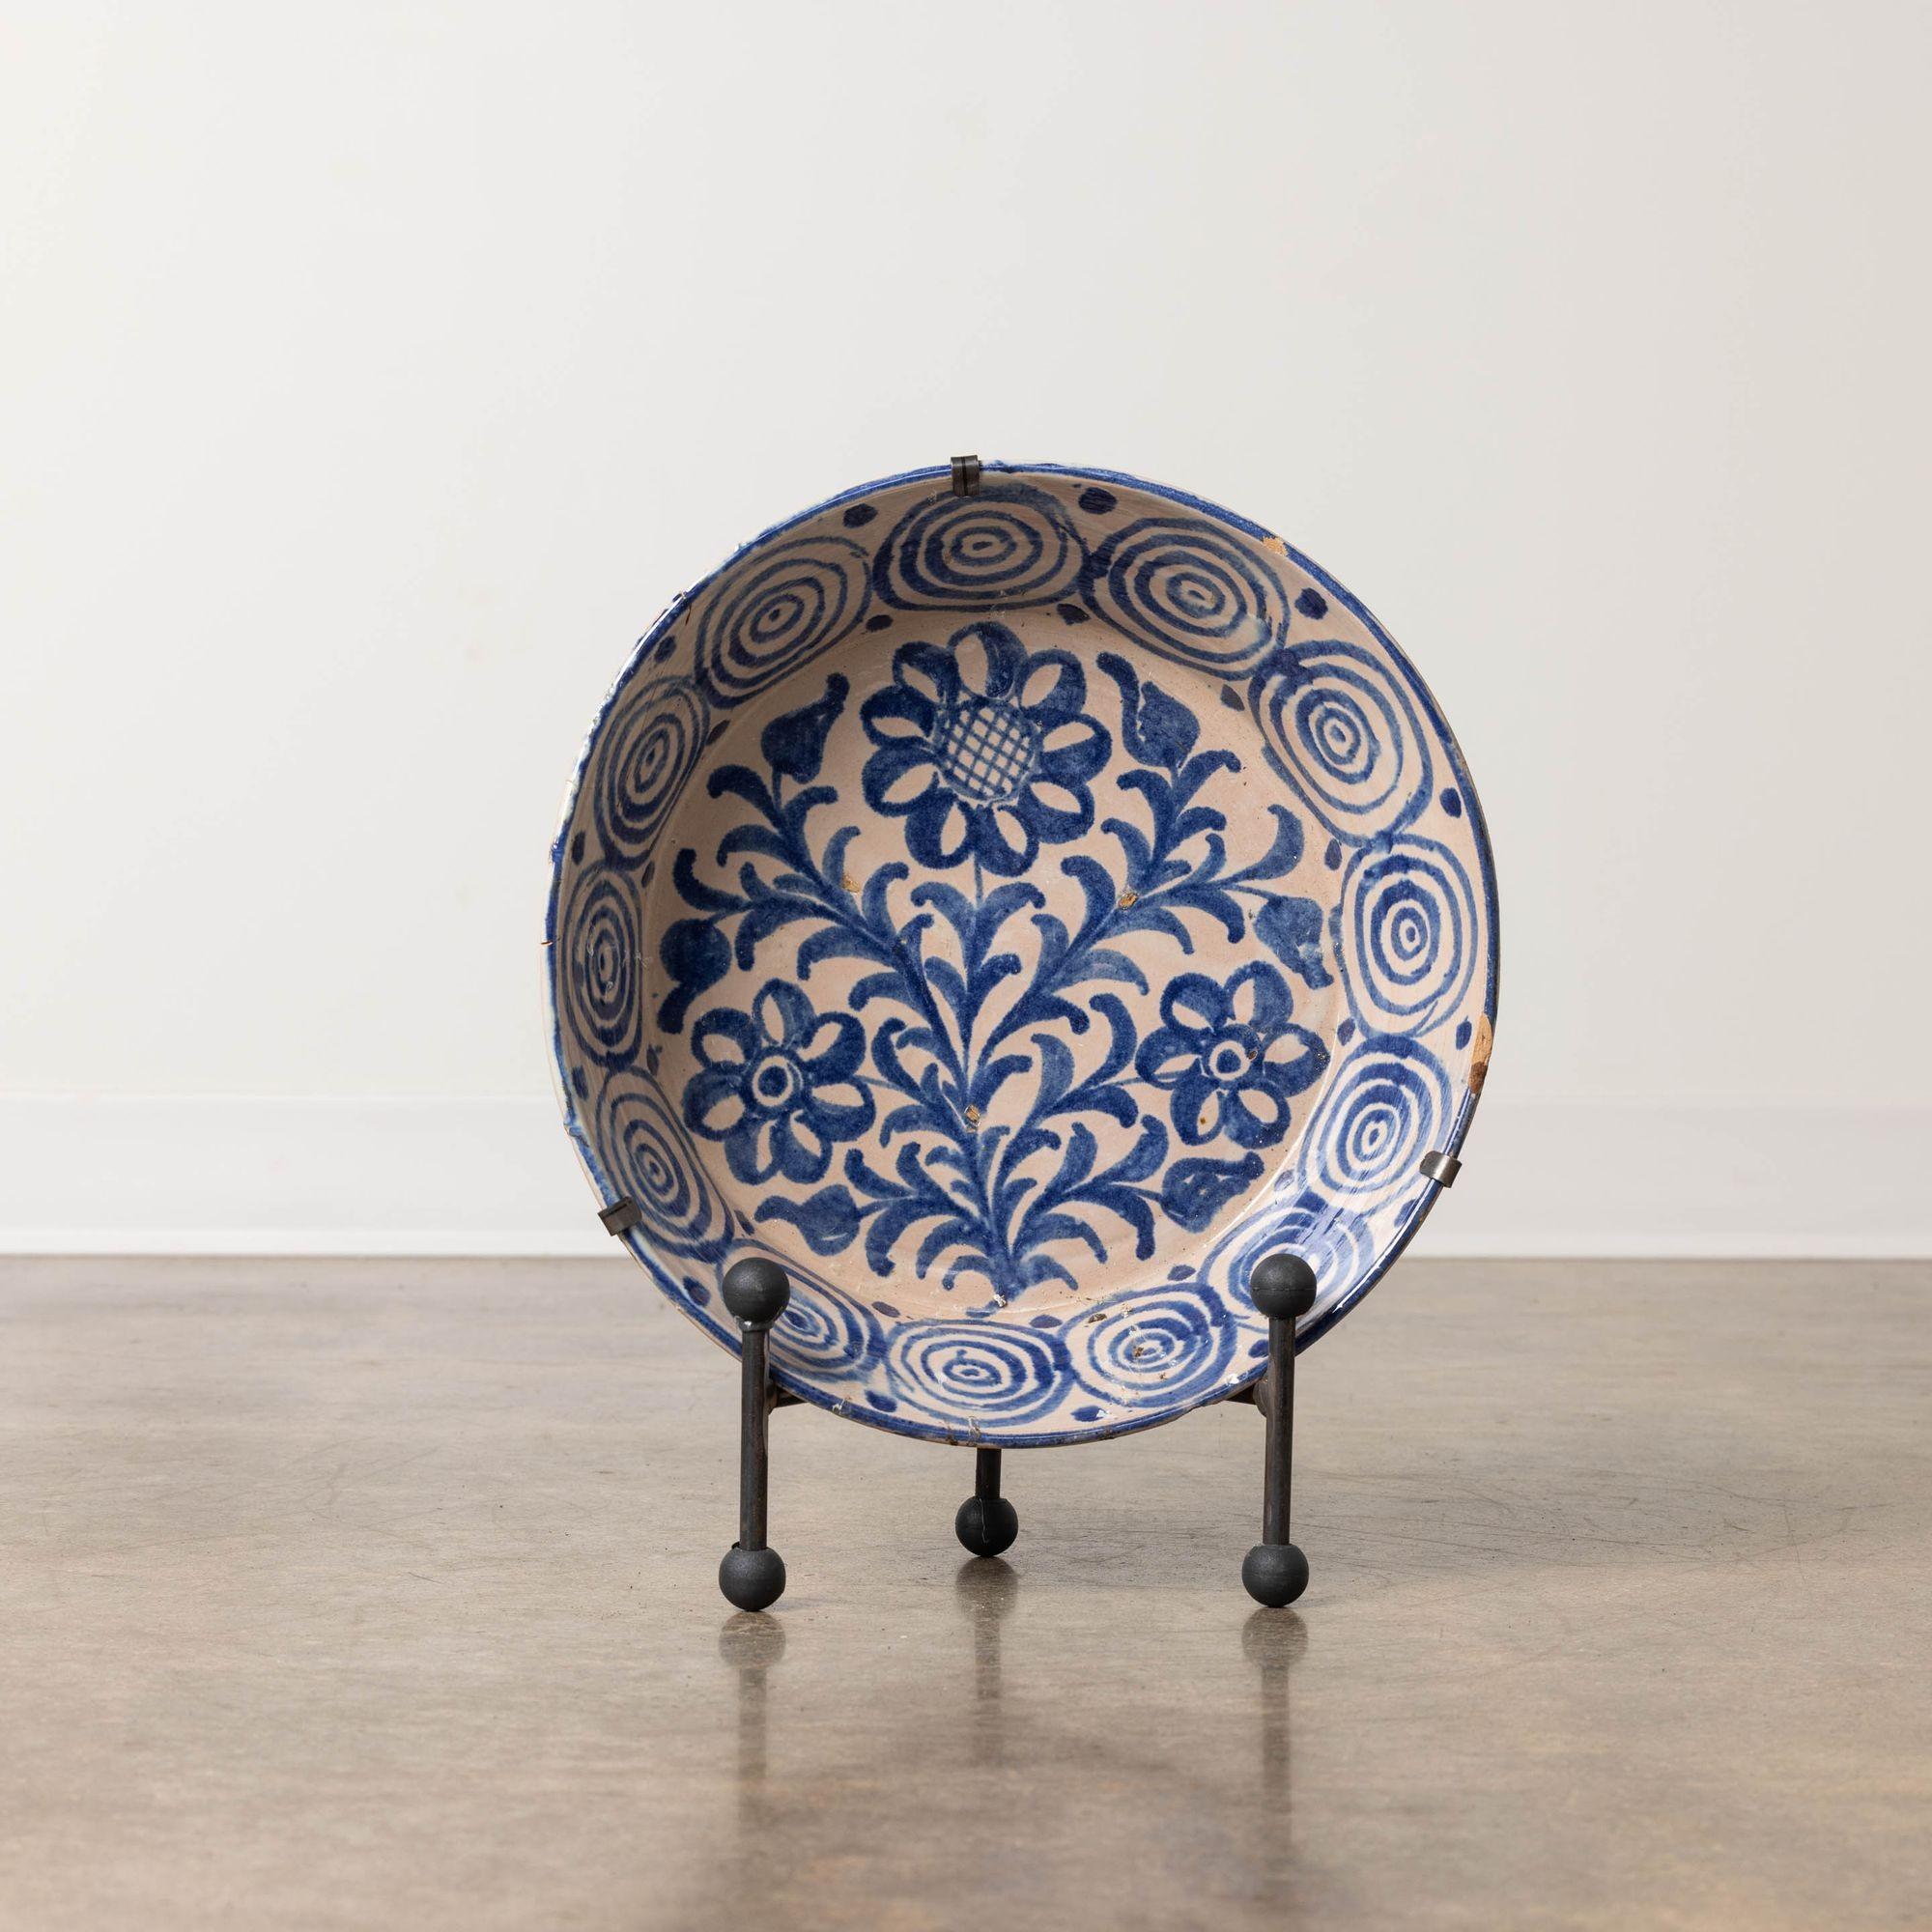 19th c. earthenware bowl from Granada, Spain painted in blue over a milk-white glaze. This deep bowl features a hand-painted floral and leaf motif on the bottom of the bowl with decorative sides. Sold with both a hand-forged iron stand and